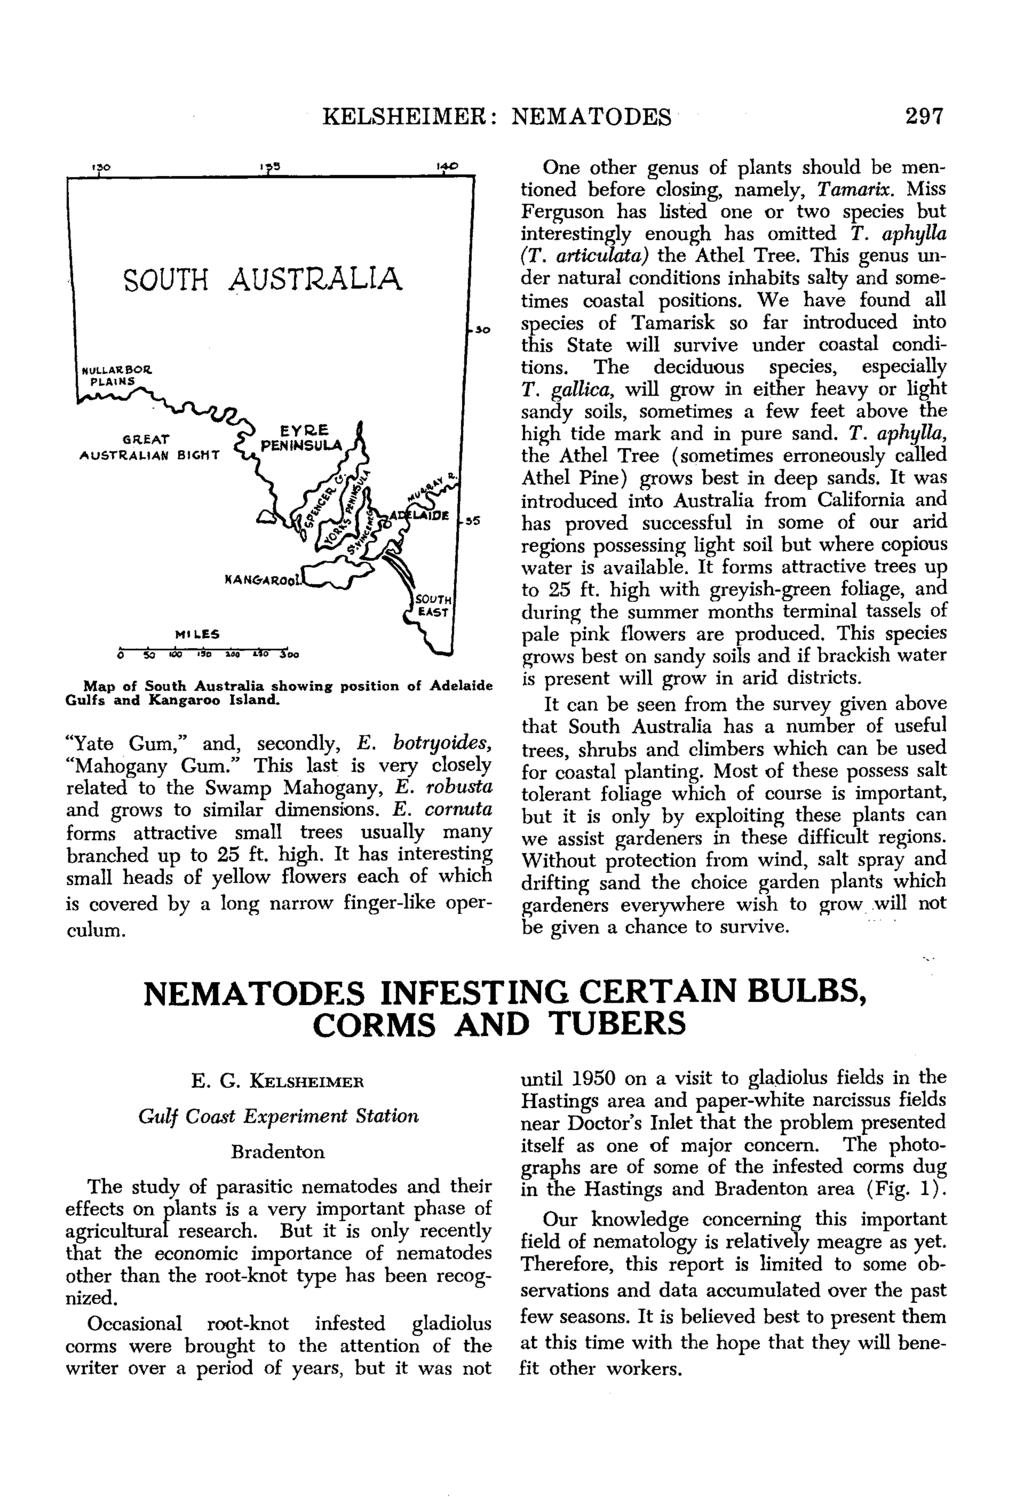 KELSHEIMER: NEMATODES 297 ISO NULUAKBOR. PLAINS SOUTH ys AUSTRALIA Map of South Australia showing position of Adelaide Gulfs and Kangaroo Island. "Yate Gum," and, secondly, E.